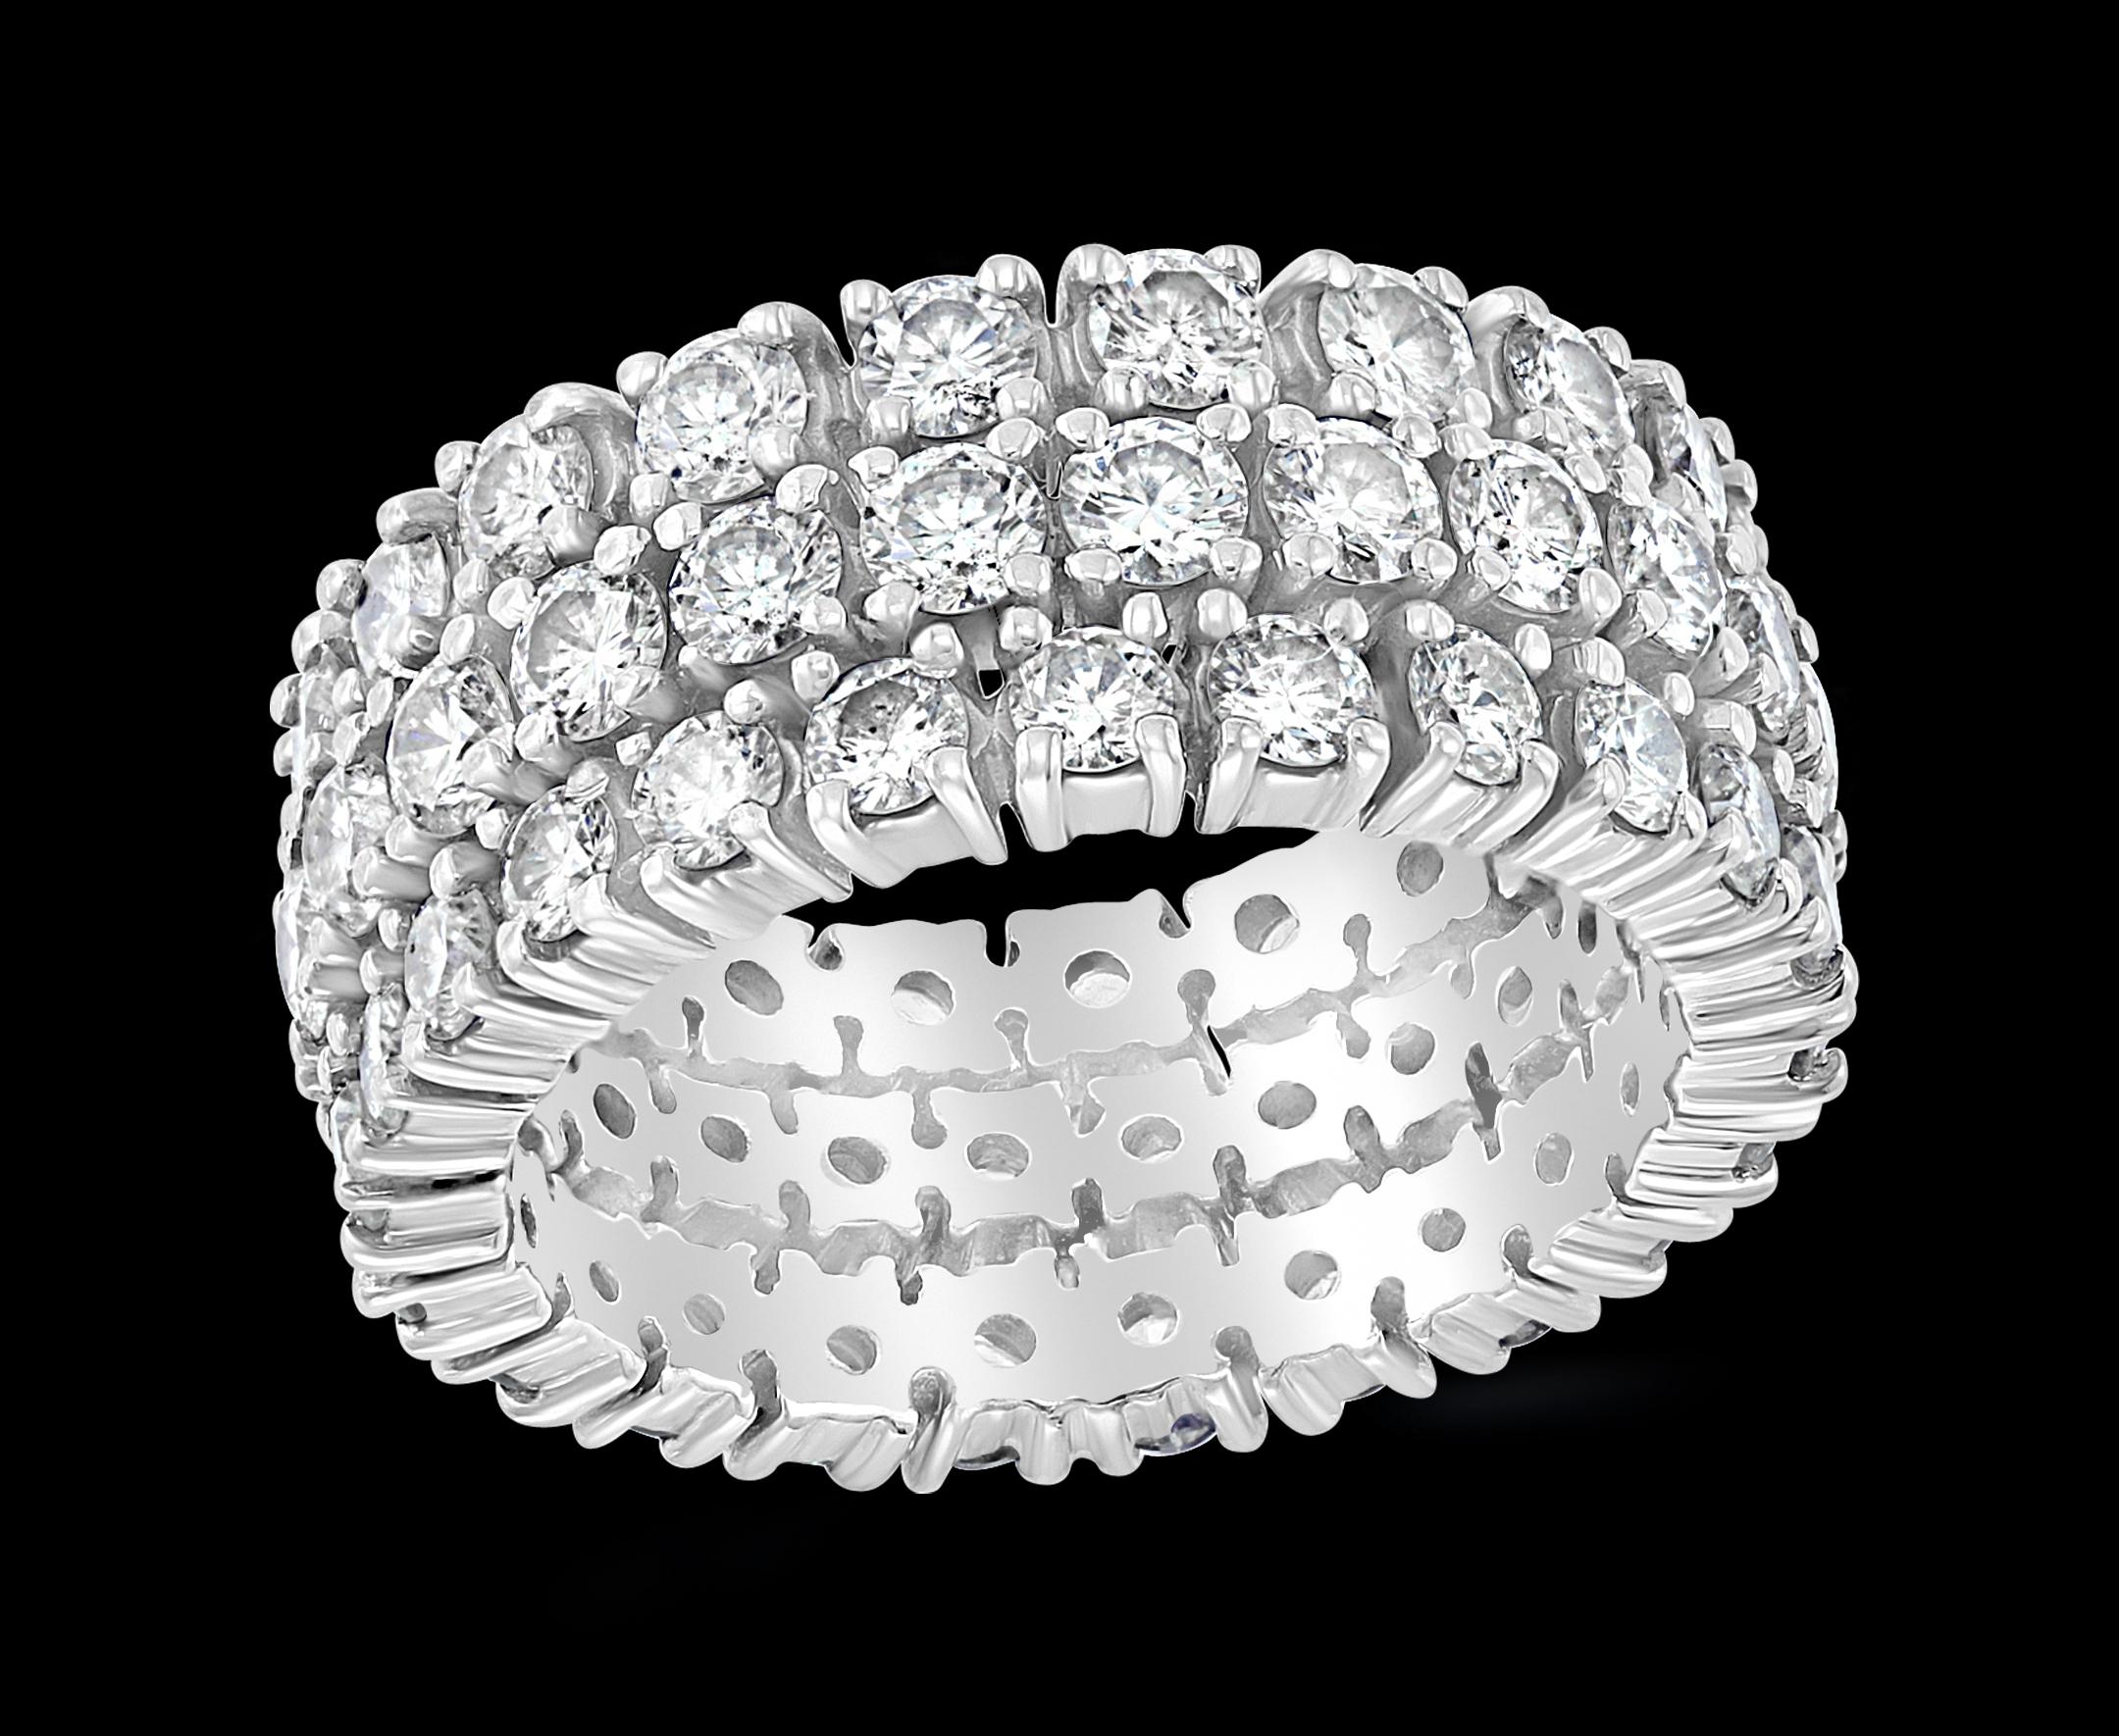 Approximately 4 Carat Diamond Eternity Engagement Band 14 Karat White Gold 3 Row Band Size 6& 1/4
Diamond quality and  color is very nice , all eye clean diamonds with lots of shine and brilliance and sparkle
This eternity band features Three rows